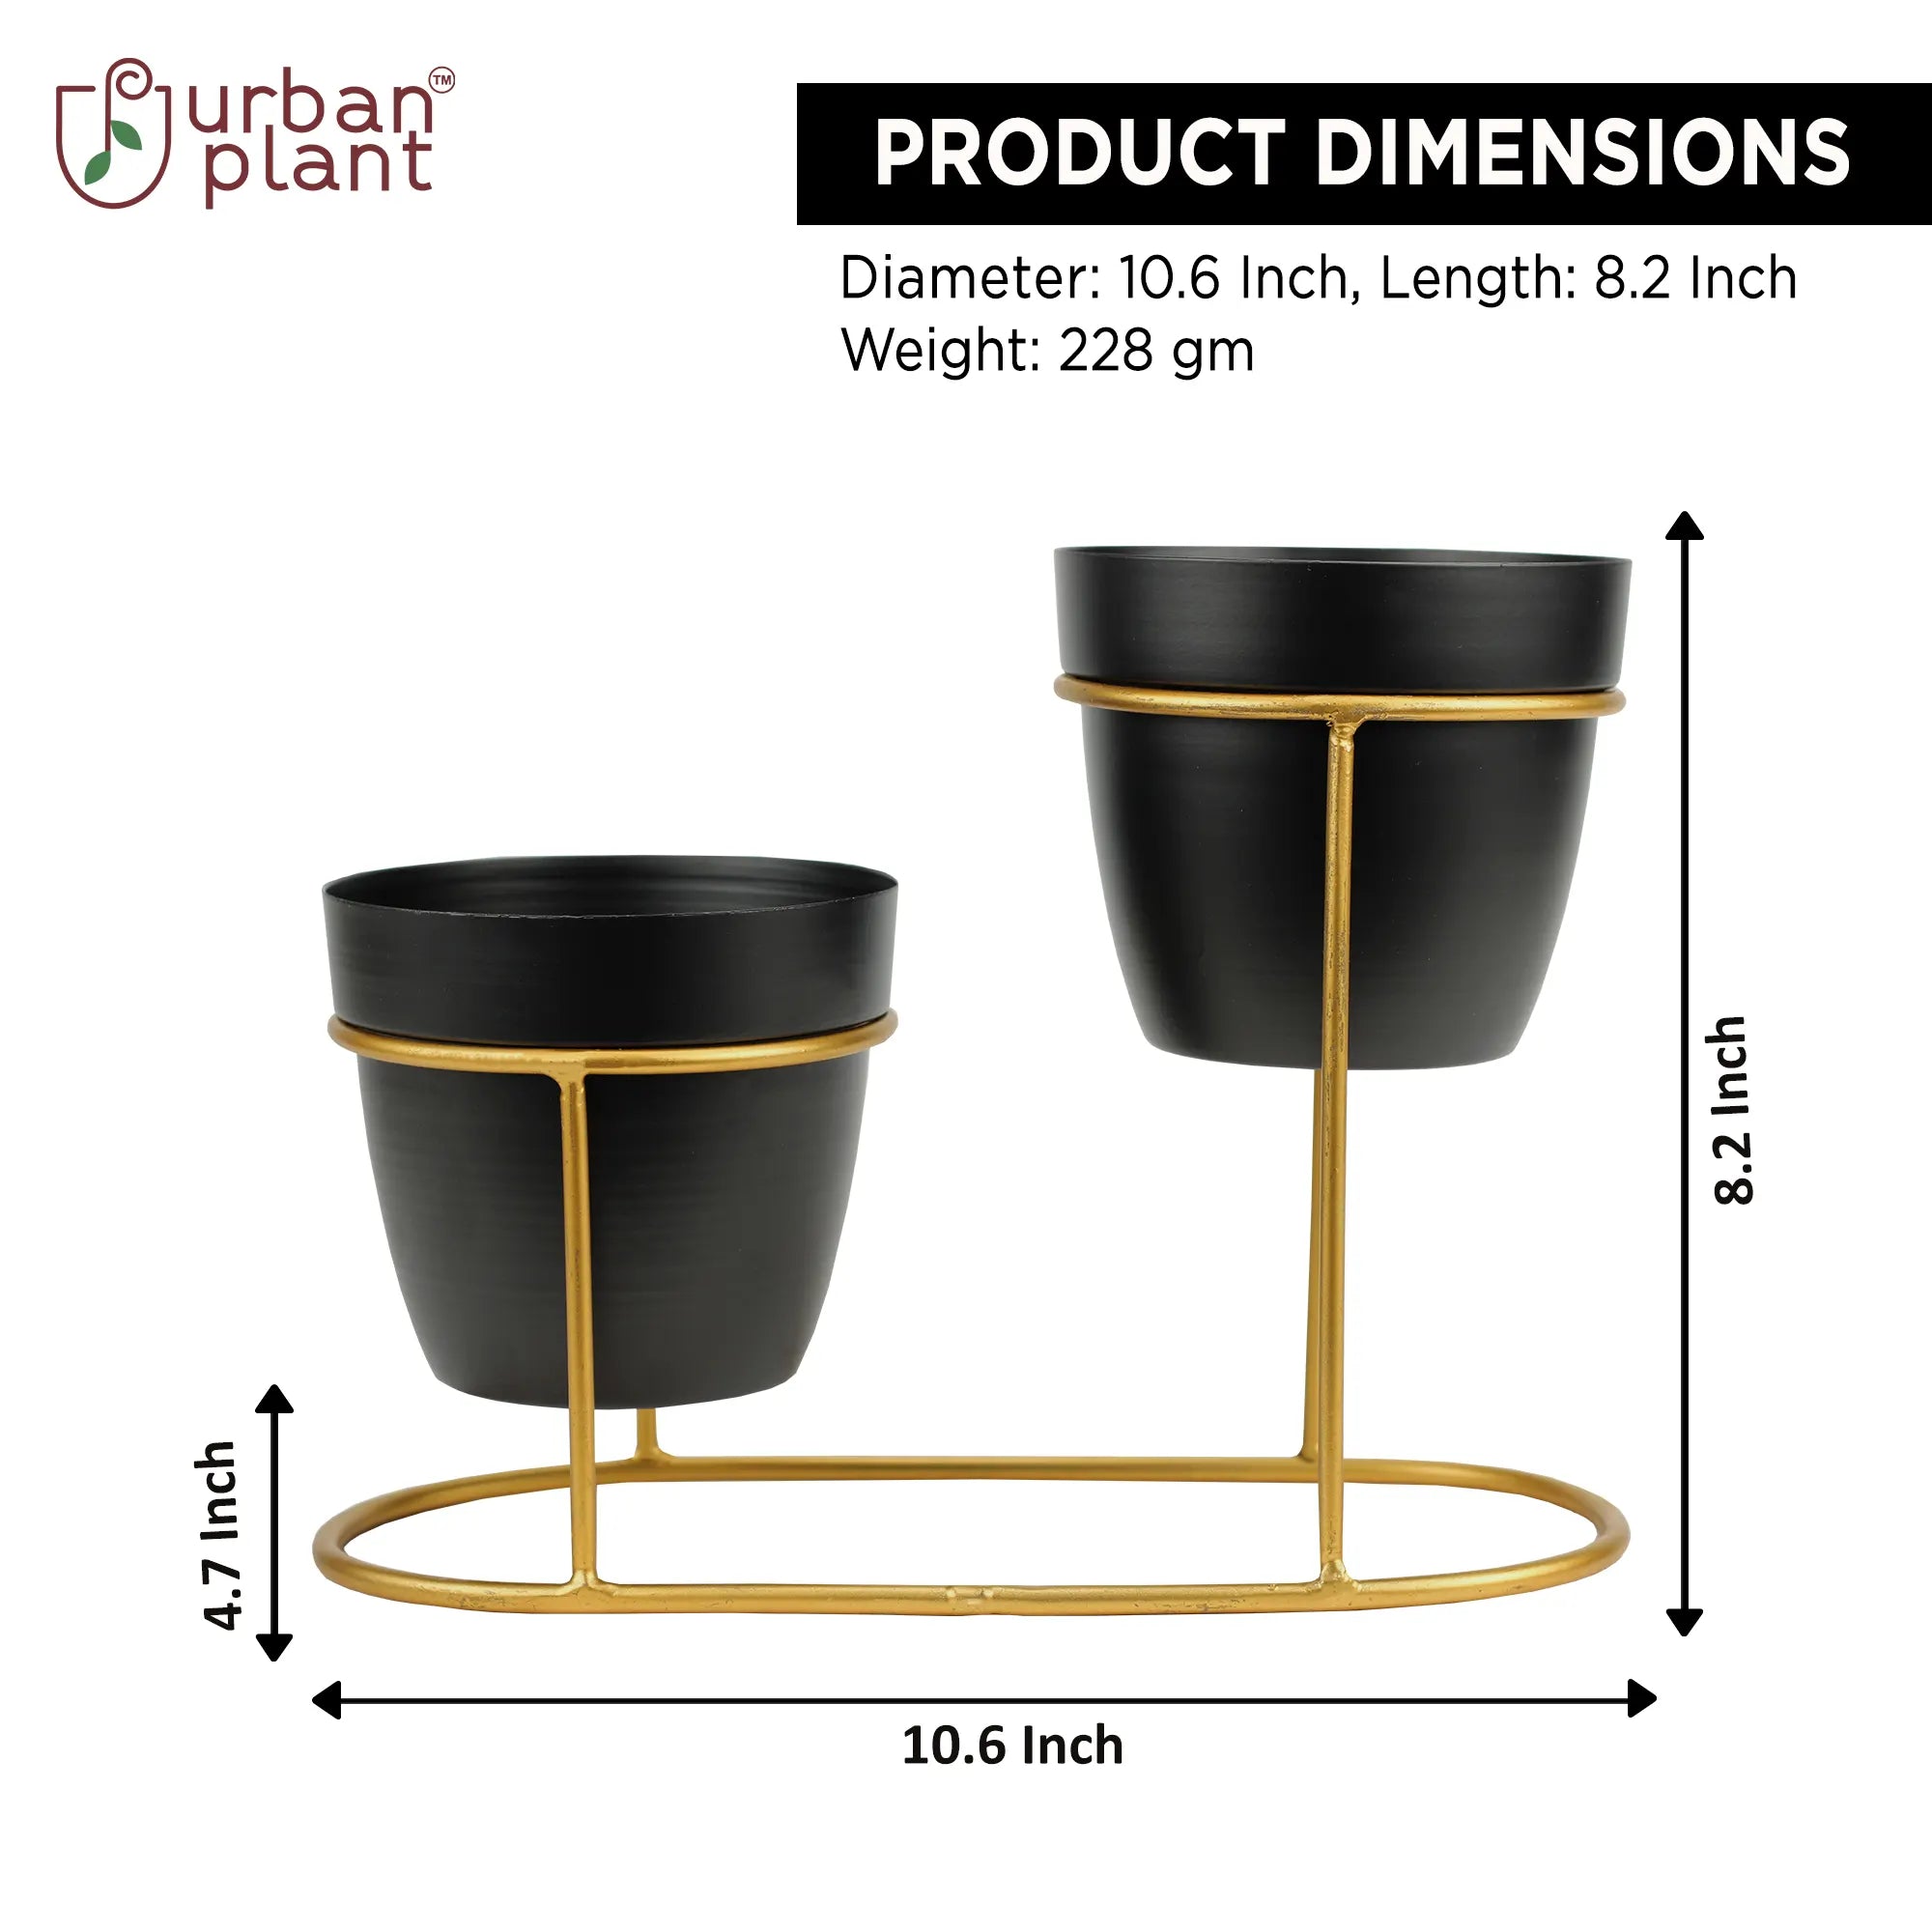 Classy Designer Metal Planters with Stand (Set of 2) Metal Planter Urban Plant 